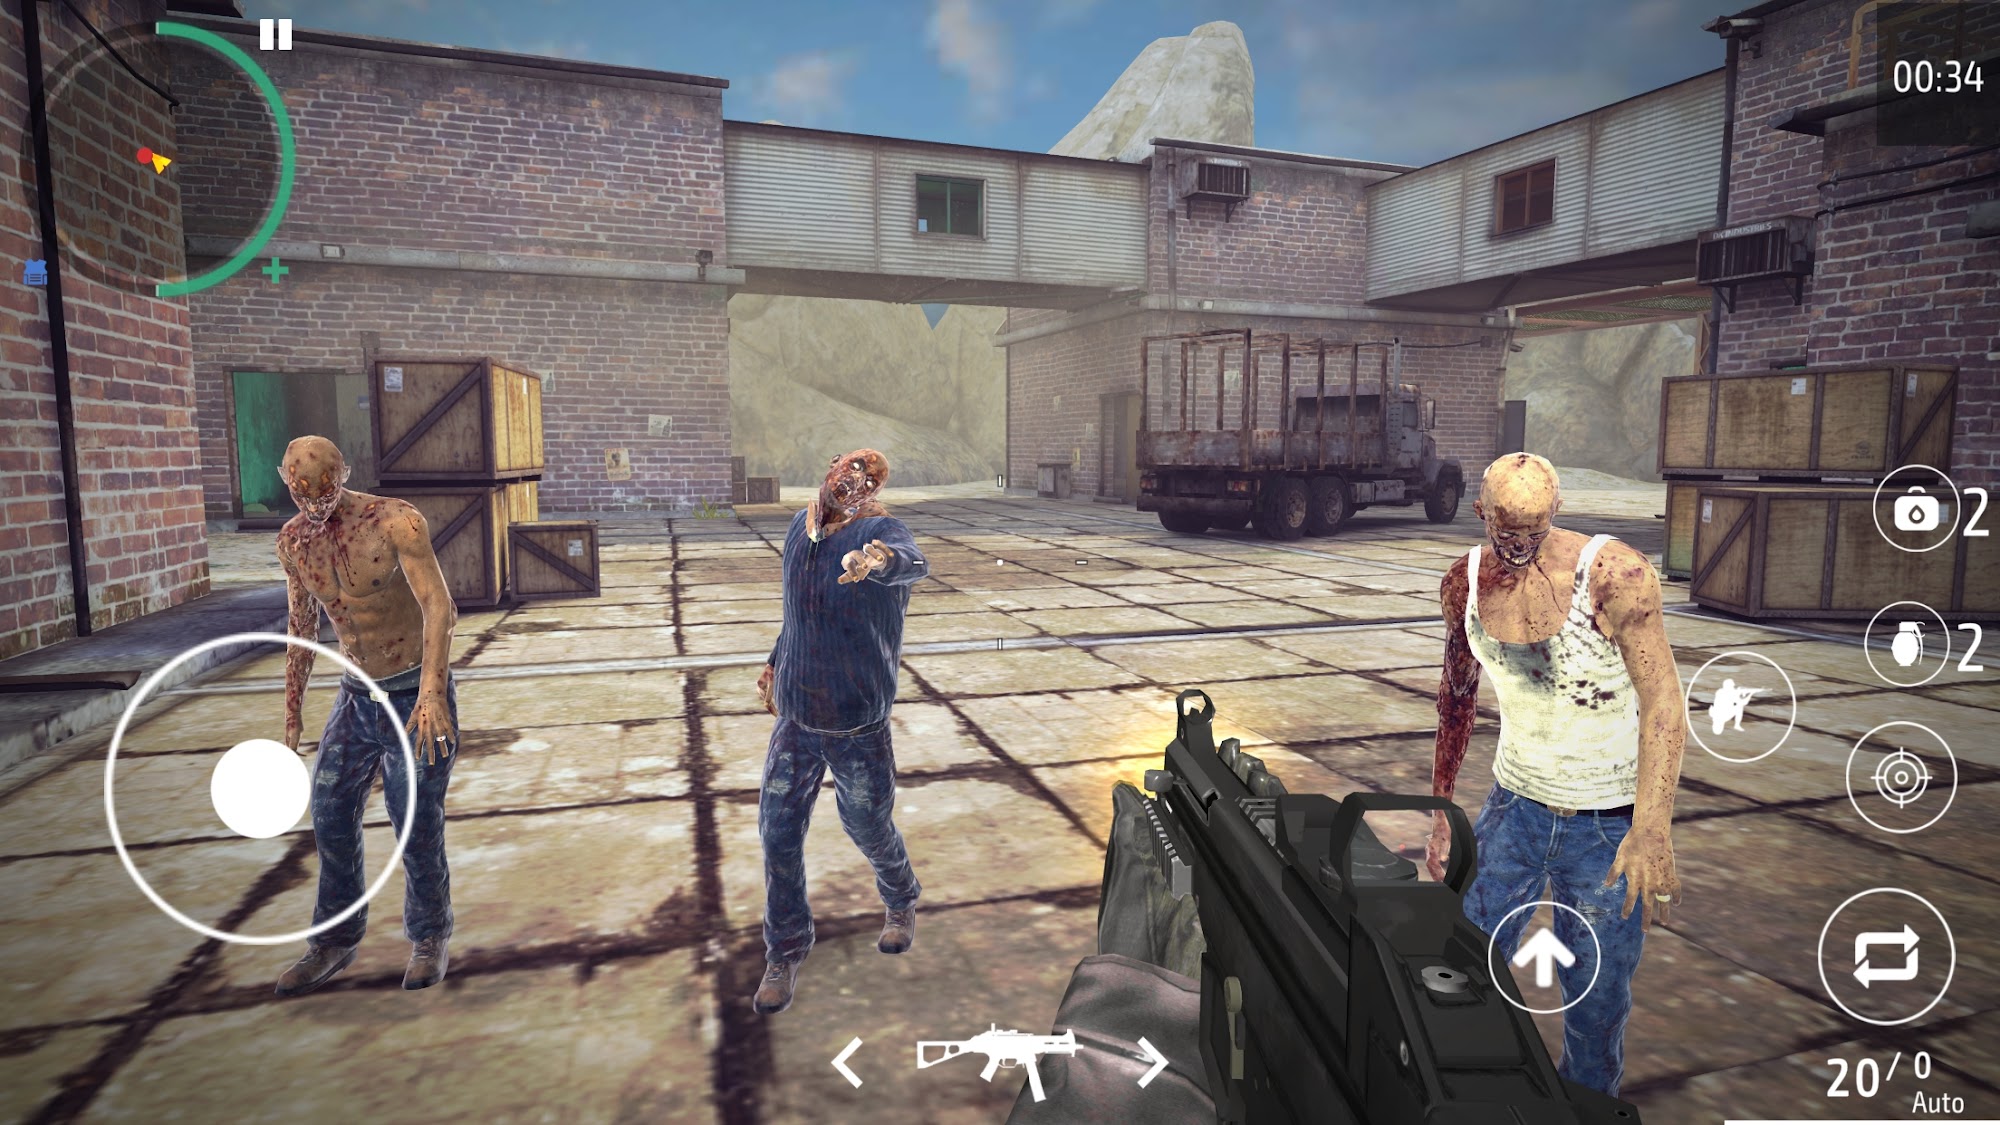 Download Zombie Shooter - fps games Android free game.